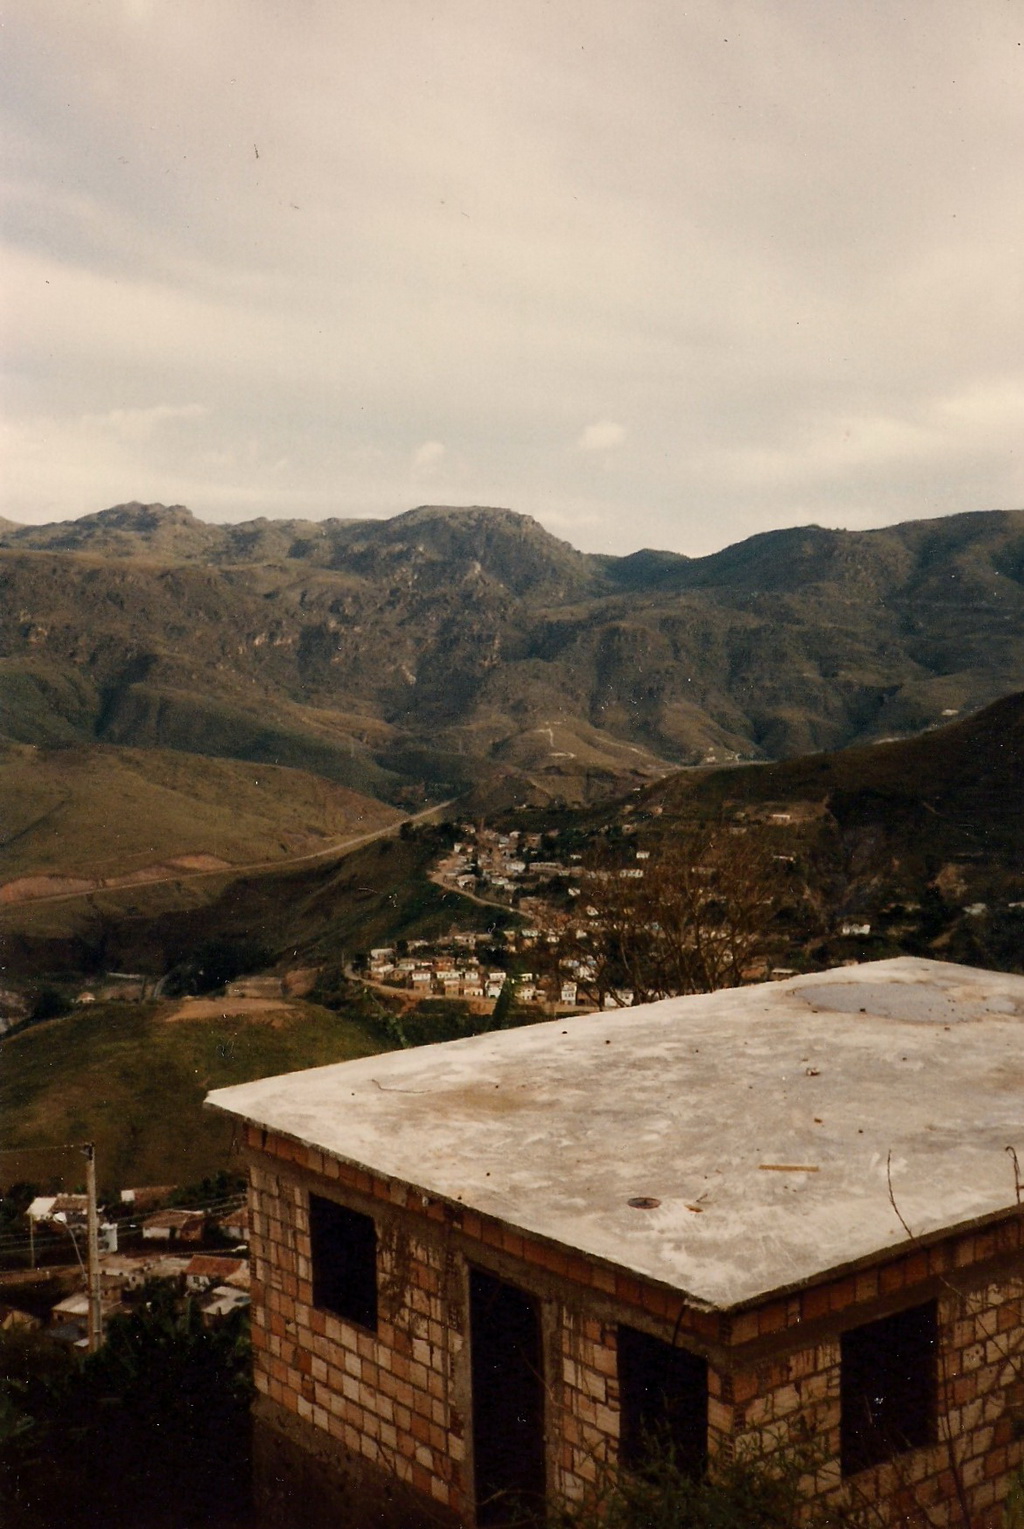 One room home with dirt floors in Ouro Preto 1986